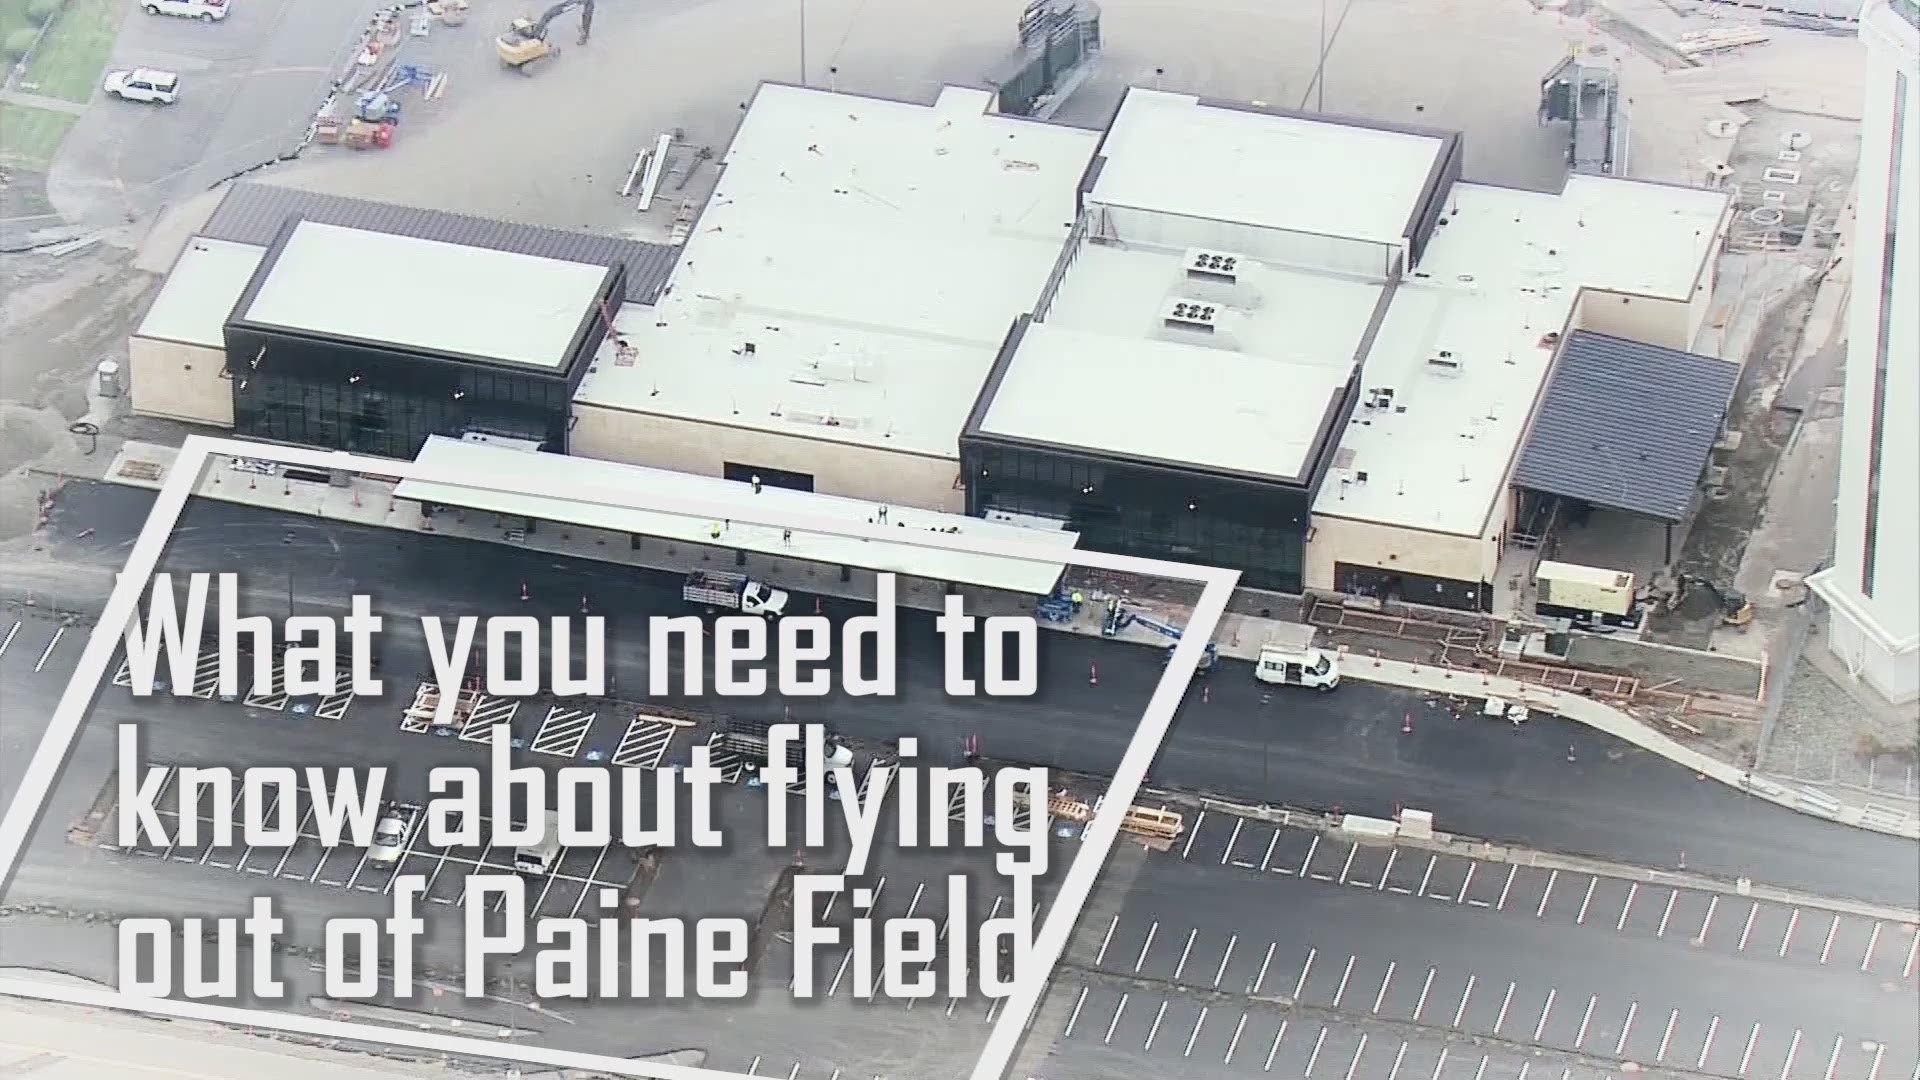 Here's what you need to know about flying out of Paine Field in Everett beginning March 4.